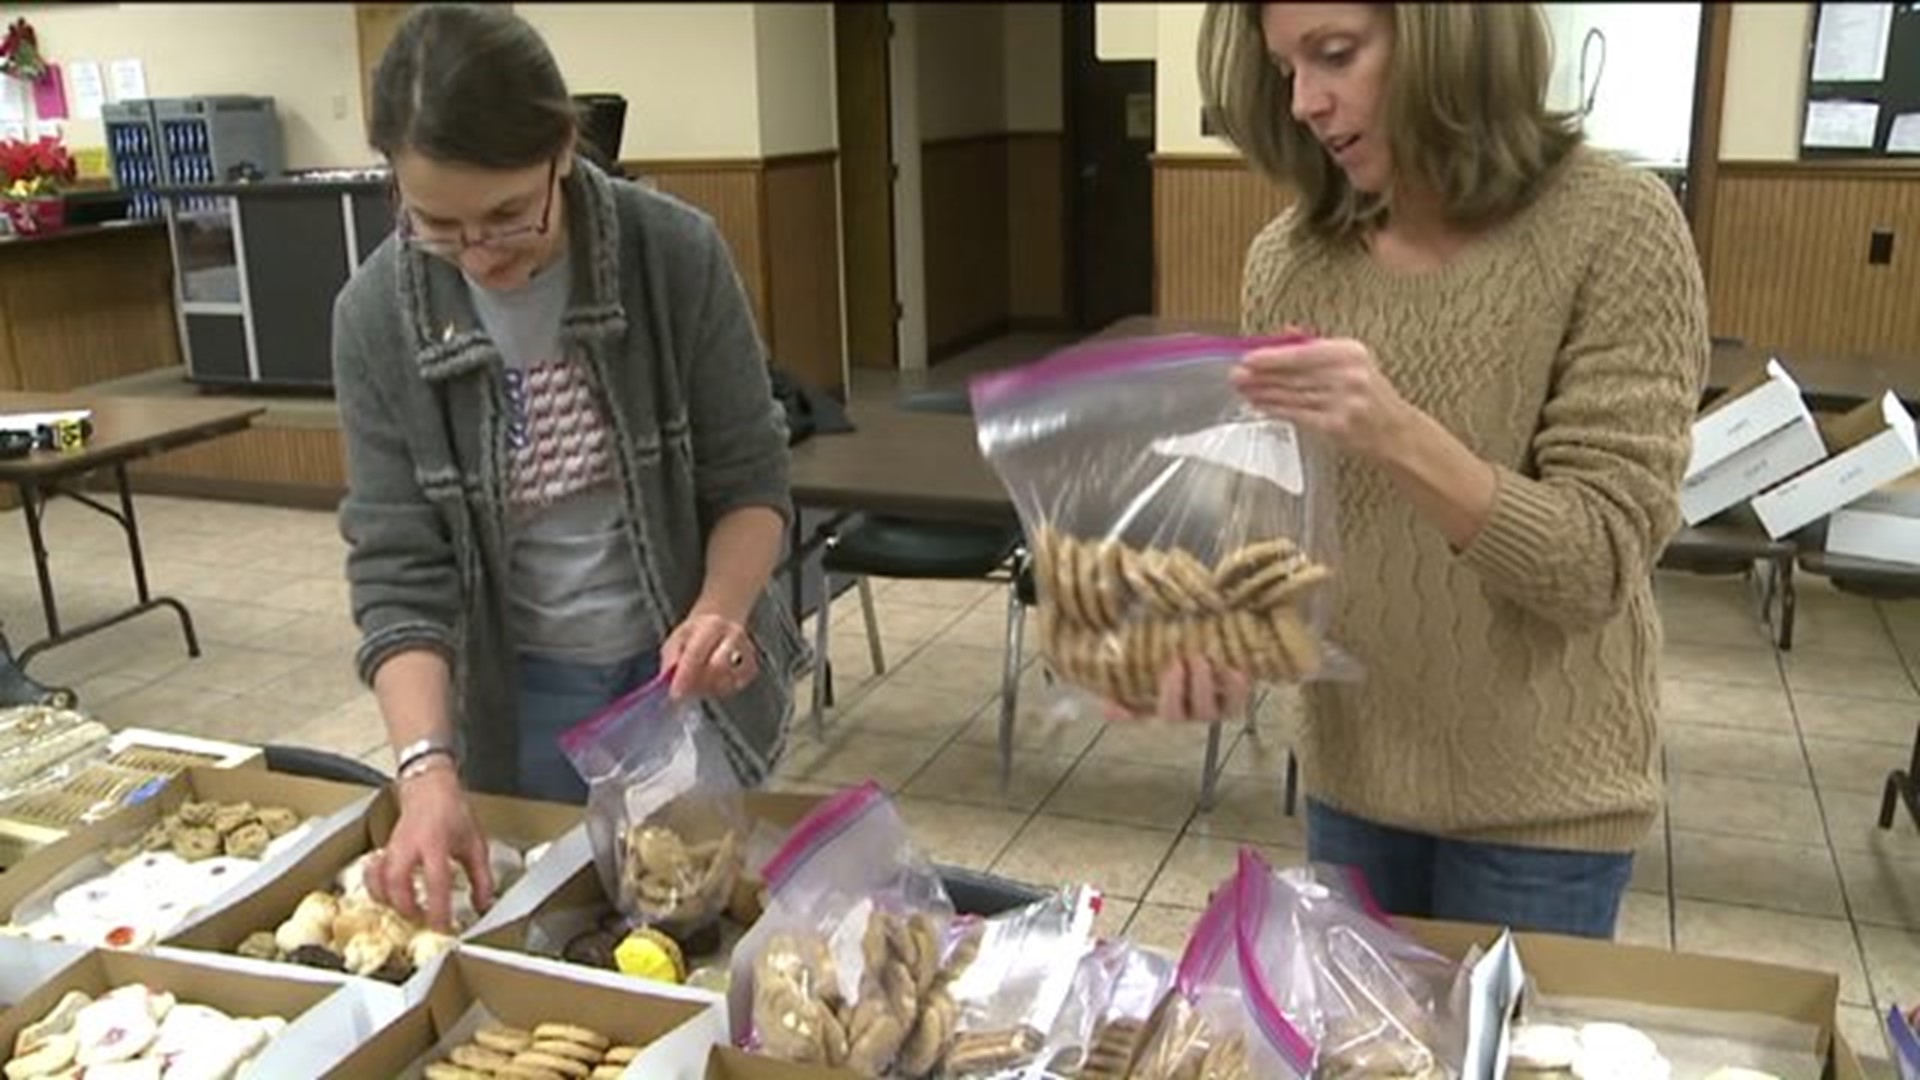 Volunteers Sending A Touch Of Home To Troops Overseas For The Holidays